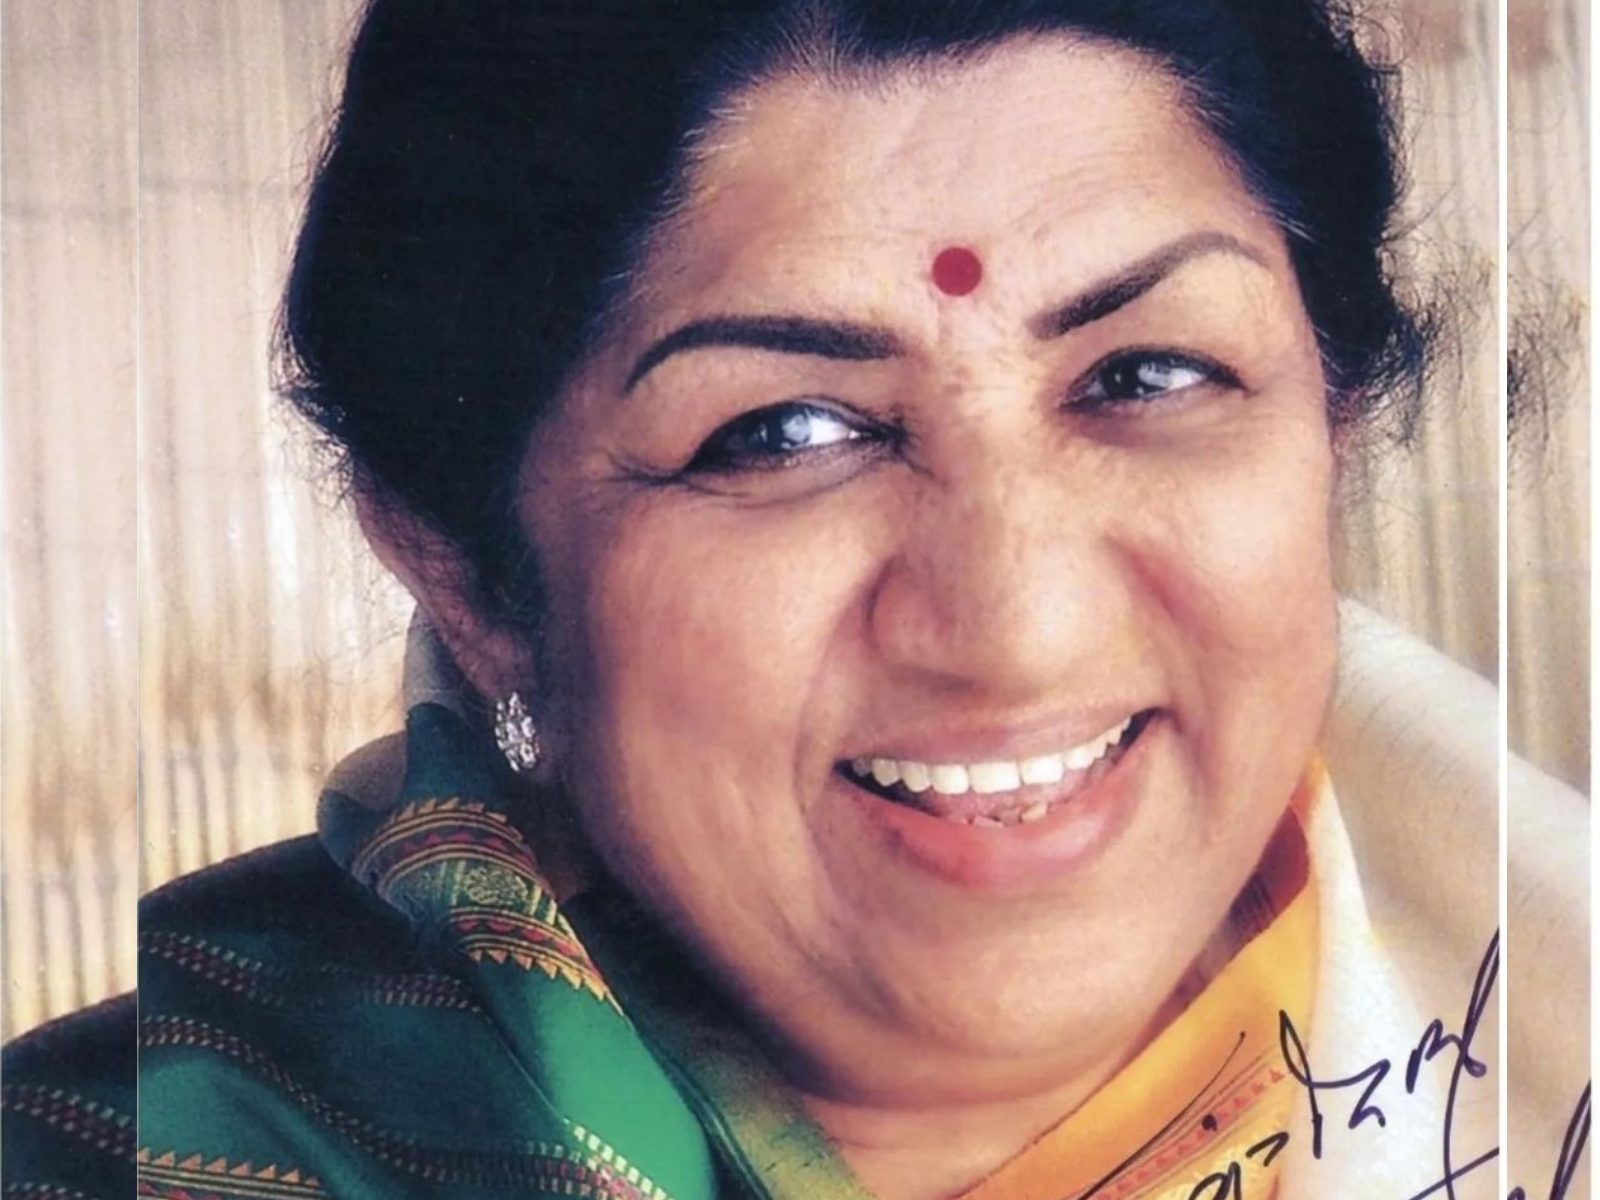 Lata Mangeshkar's Best Duet Songs With Mohammed Rafi, Kishore Kumar, Sonu  Nigam And Others